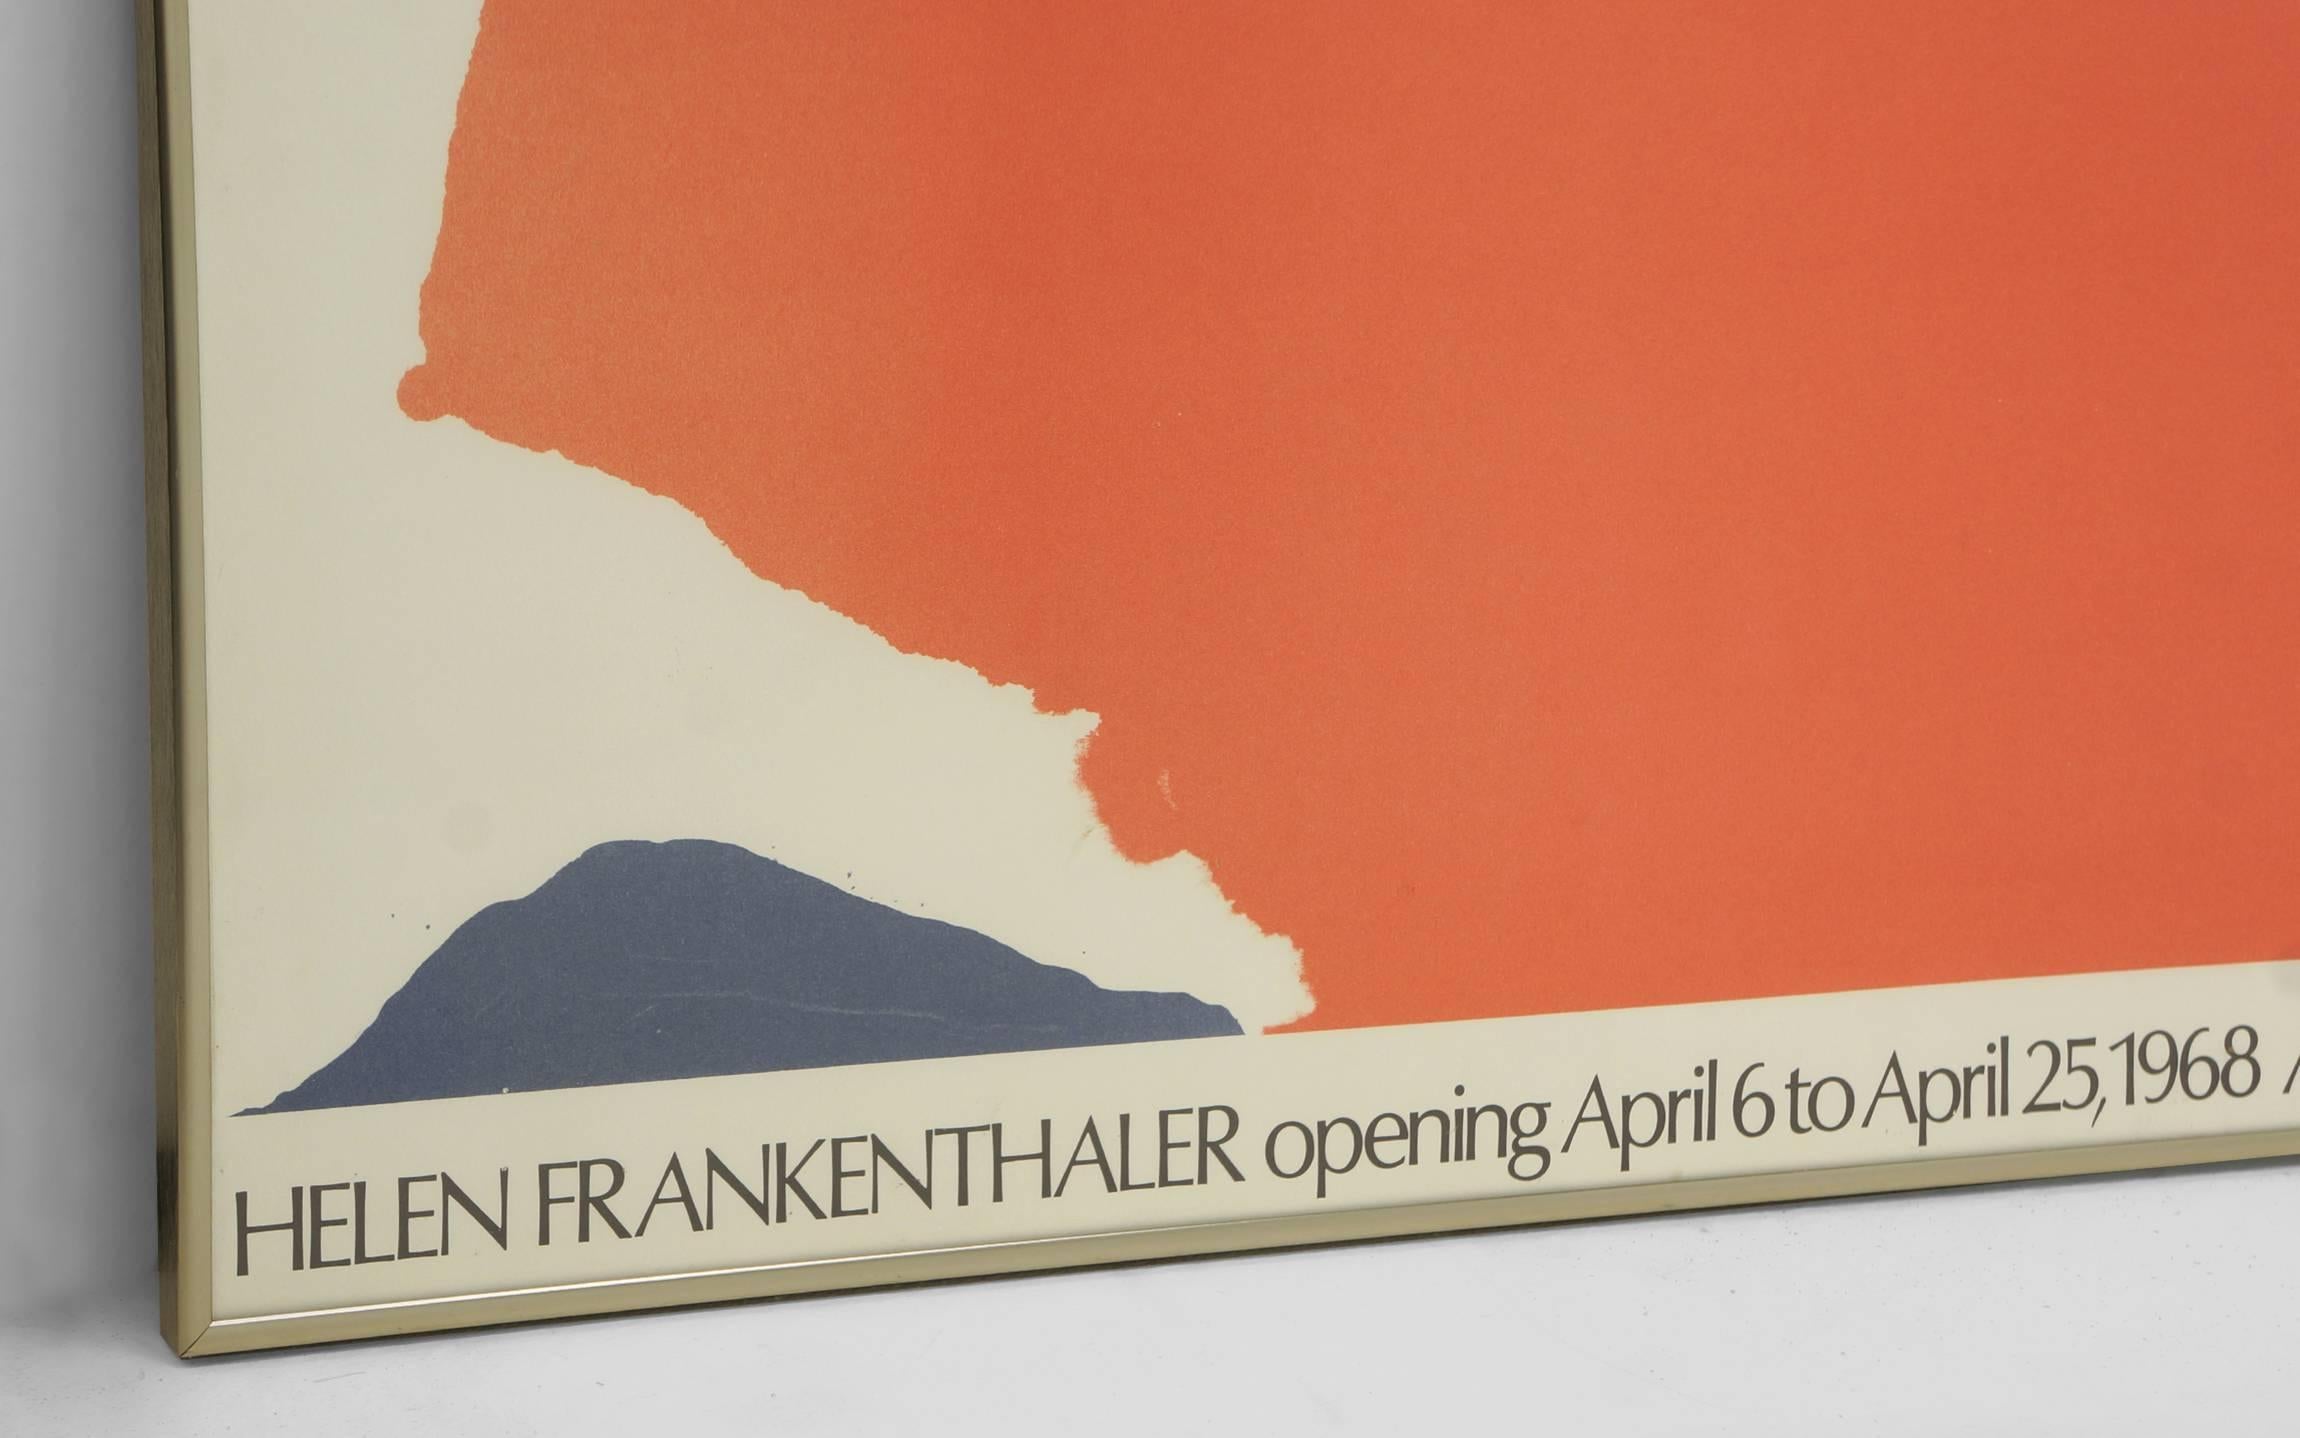 Helen Frankenthaler 1968 lithograph print by poster originals limited, advertising Frankenthaler's opening at Andre Emmerich gallery in New York. The example is from the 1974 second edition.